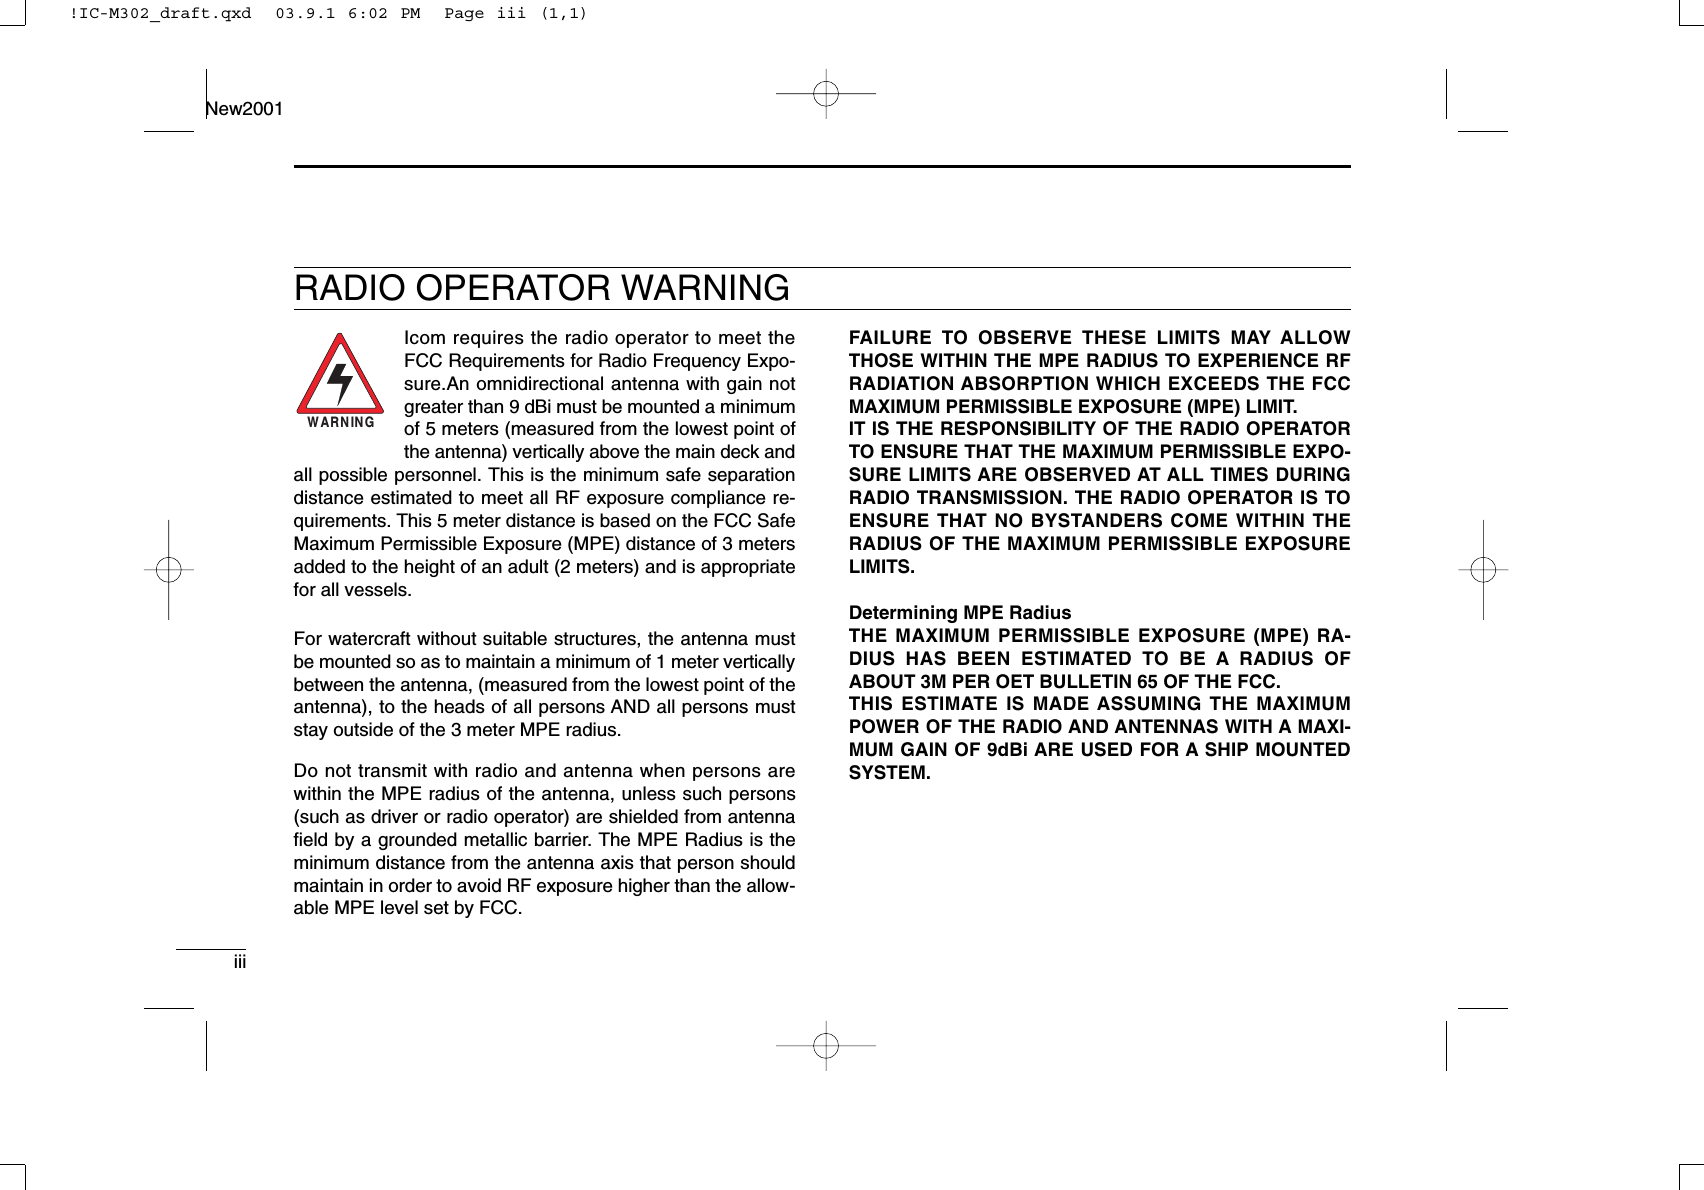 iiiNew2001RADIO OPERATOR WARNINGIcom requires the radio operator to meet theFCC Requirements for Radio Frequency Expo-sure.An omnidirectional antenna with gain notgreater than 9 dBi must be mounted a minimumof 5 meters (measured from the lowest point ofthe antenna) vertically above the main deck andall possible personnel. This is the minimum safe separationdistance estimated to meet all RF exposure compliance re-quirements. This 5 meter distance is based on the FCC SafeMaximum Permissible Exposure (MPE) distance of 3 metersadded to the height of an adult (2 meters) and is appropriatefor all vessels.For watercraft without suitable structures, the antenna mustbe mounted so as to maintain a minimum of 1 meter verticallybetween the antenna, (measured from the lowest point of theantenna), to the heads of all persons AND all persons muststay outside of the 3 meter MPE radius.Do not transmit with radio and antenna when persons arewithin the MPE radius of the antenna, unless such persons(such as driver or radio operator) are shielded from antennaﬁeld by a grounded metallic barrier. The MPE Radius is theminimum distance from the antenna axis that person shouldmaintain in order to avoid RF exposure higher than the allow-able MPE level set by FCC.WARNINGFAILURE TO OBSERVE THESE LIMITS MAY ALLOWTHOSE WITHIN THE MPE RADIUS TO EXPERIENCE RFRADIATION ABSORPTION WHICH EXCEEDS THE FCCMAXIMUM PERMISSIBLE EXPOSURE (MPE) LIMIT.IT IS THE RESPONSIBILITY OF THE RADIO OPERATORTO ENSURE THAT THE MAXIMUM PERMISSIBLE EXPO-SURE LIMITS ARE OBSERVED AT ALL TIMES DURINGRADIO TRANSMISSION. THE RADIO OPERATOR IS TOENSURE THAT NO BYSTANDERS COME WITHIN THERADIUS OF THE MAXIMUM PERMISSIBLE EXPOSURELIMITS.Determining MPE RadiusTHE MAXIMUM PERMISSIBLE EXPOSURE (MPE) RA-DIUS HAS BEEN ESTIMATED TO BE A RADIUS OFABOUT 3M PER OET BULLETIN 65 OF THE FCC.THIS ESTIMATE IS MADE ASSUMING THE MAXIMUMPOWER OF THE RADIO AND ANTENNAS WITH A MAXI-MUM GAIN OF 9dBi ARE USED FOR A SHIP MOUNTEDSYSTEM.!IC-M302_draft.qxd  03.9.1 6:02 PM  Page iii (1,1)